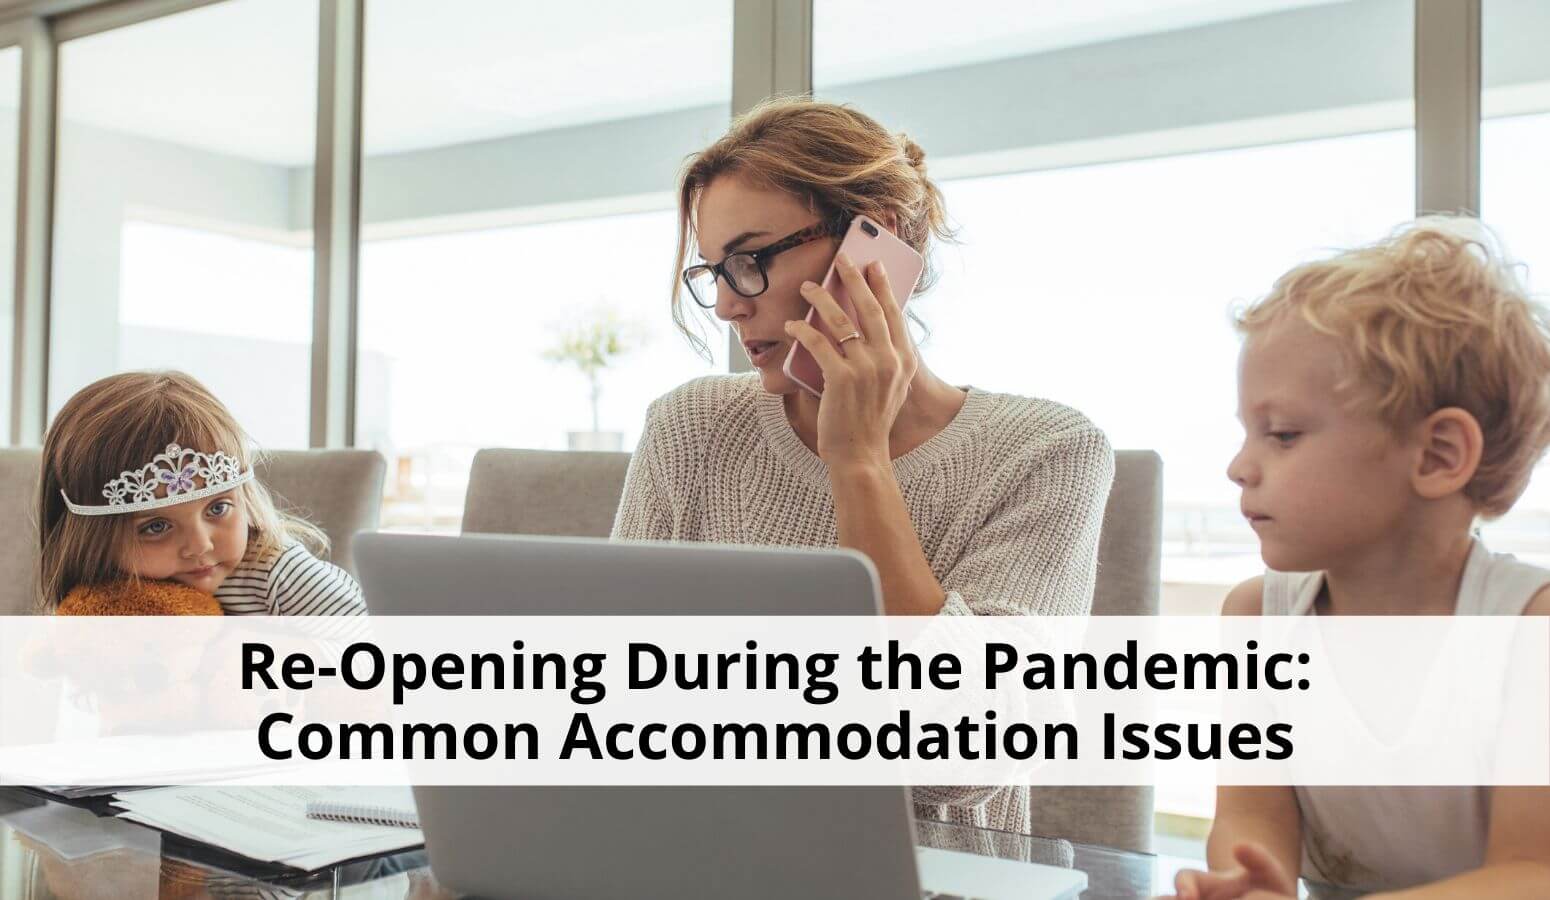 Featured image for “Accommodation Issues Impacted by COVID-19: Re-Opening During the Pandemic”